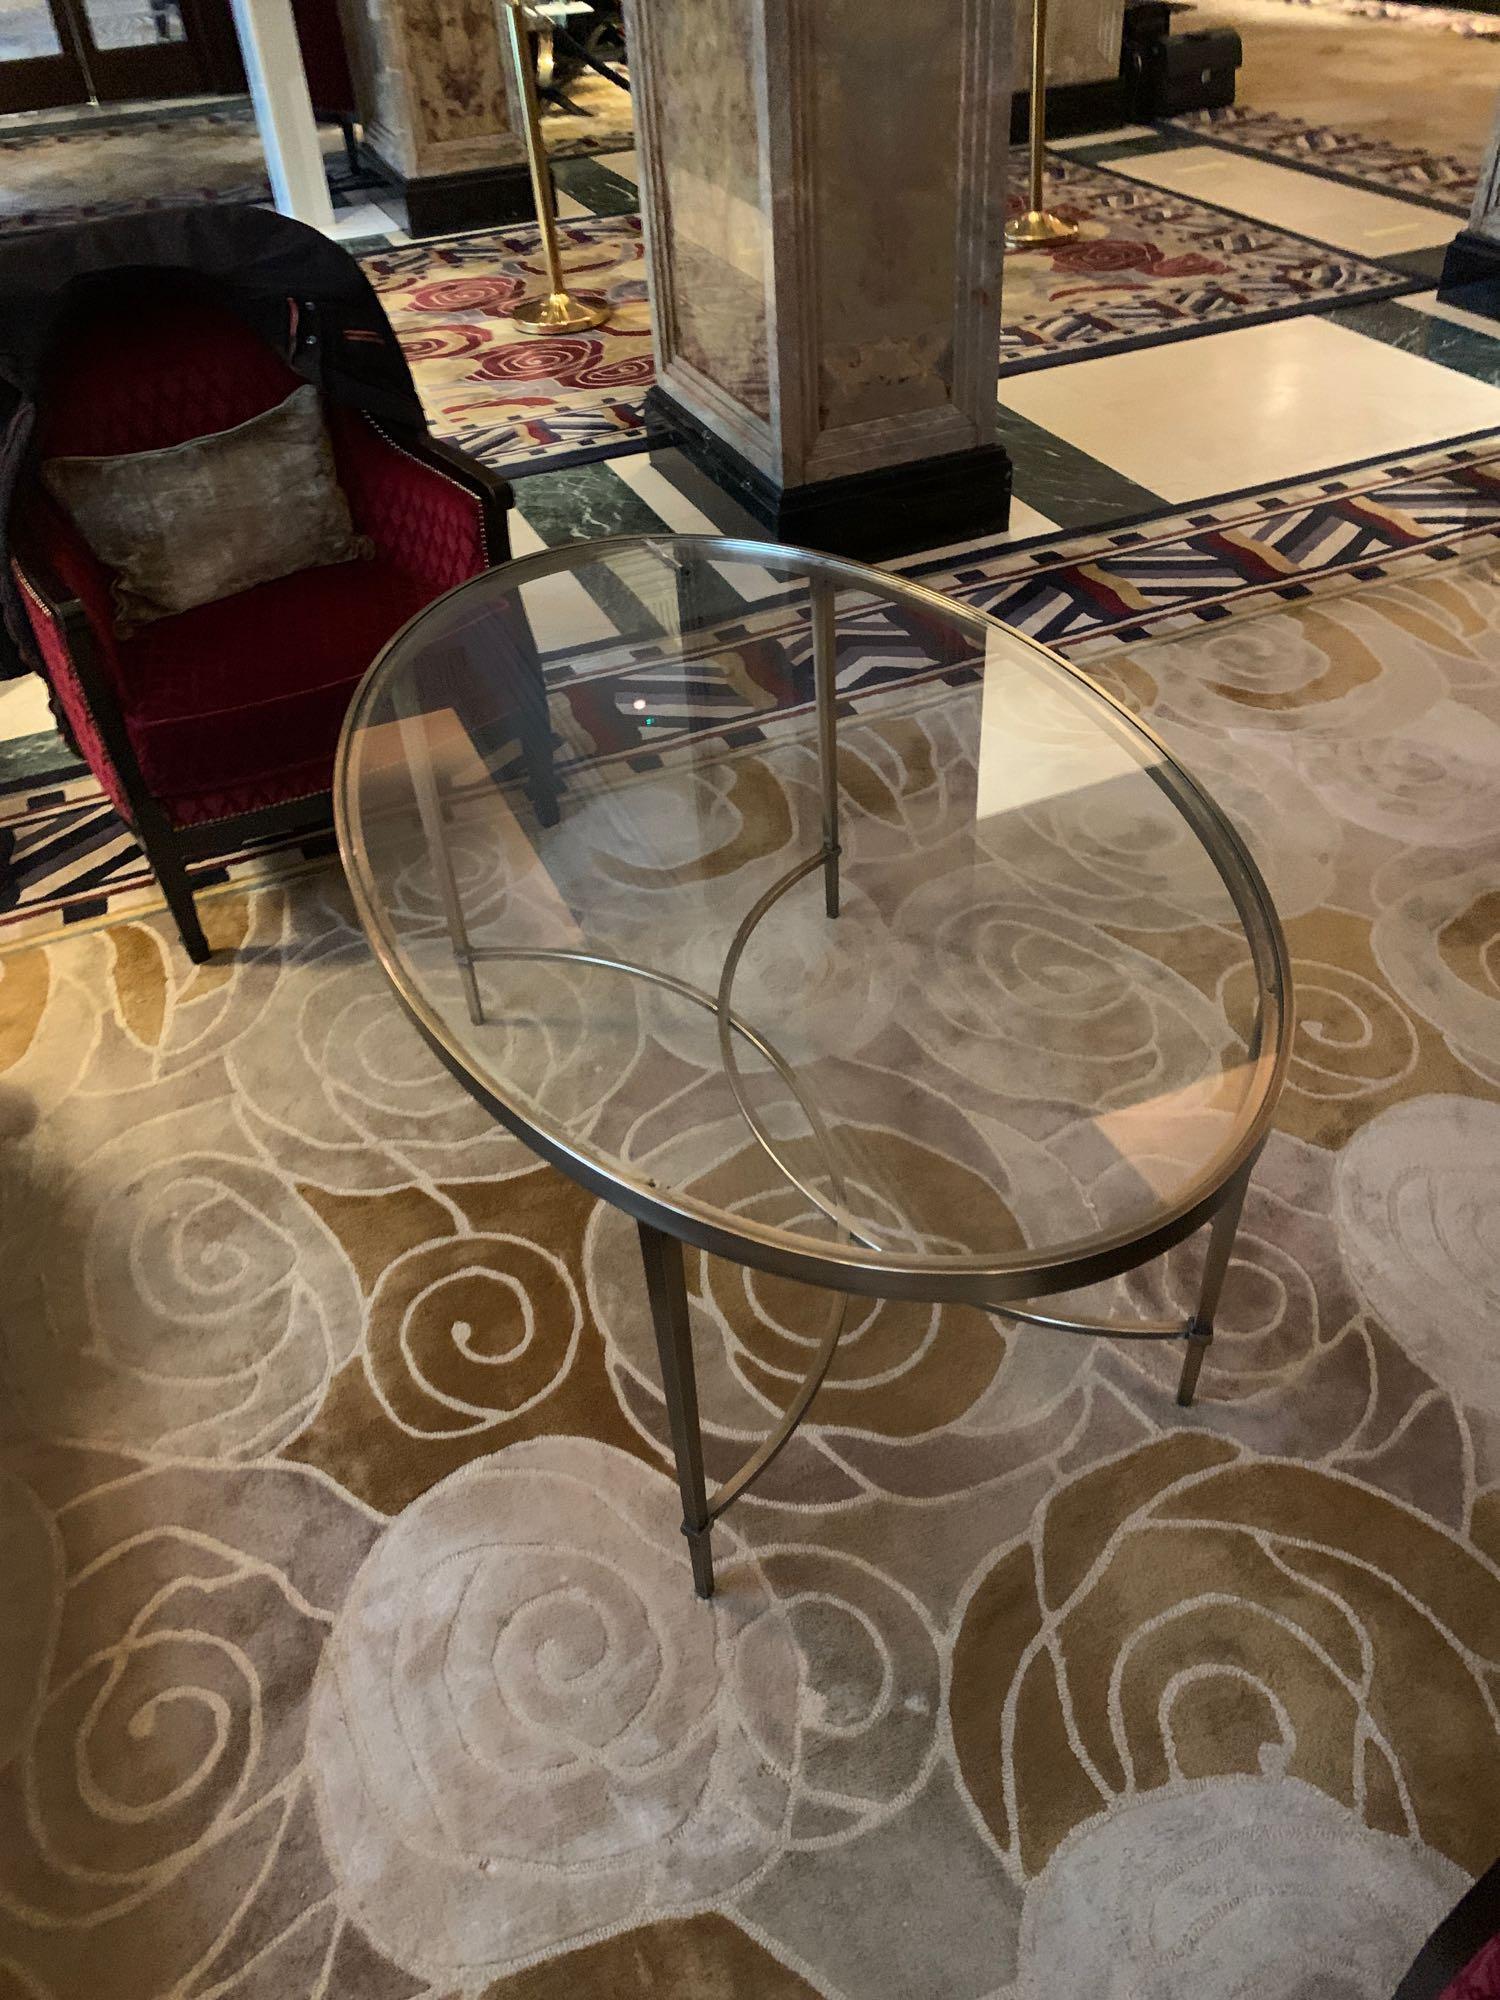 Porta Romana Large Oval And Brass Coffee Table 140 x 87cm x 62cm With A Art Deco Styled Base ( Loc